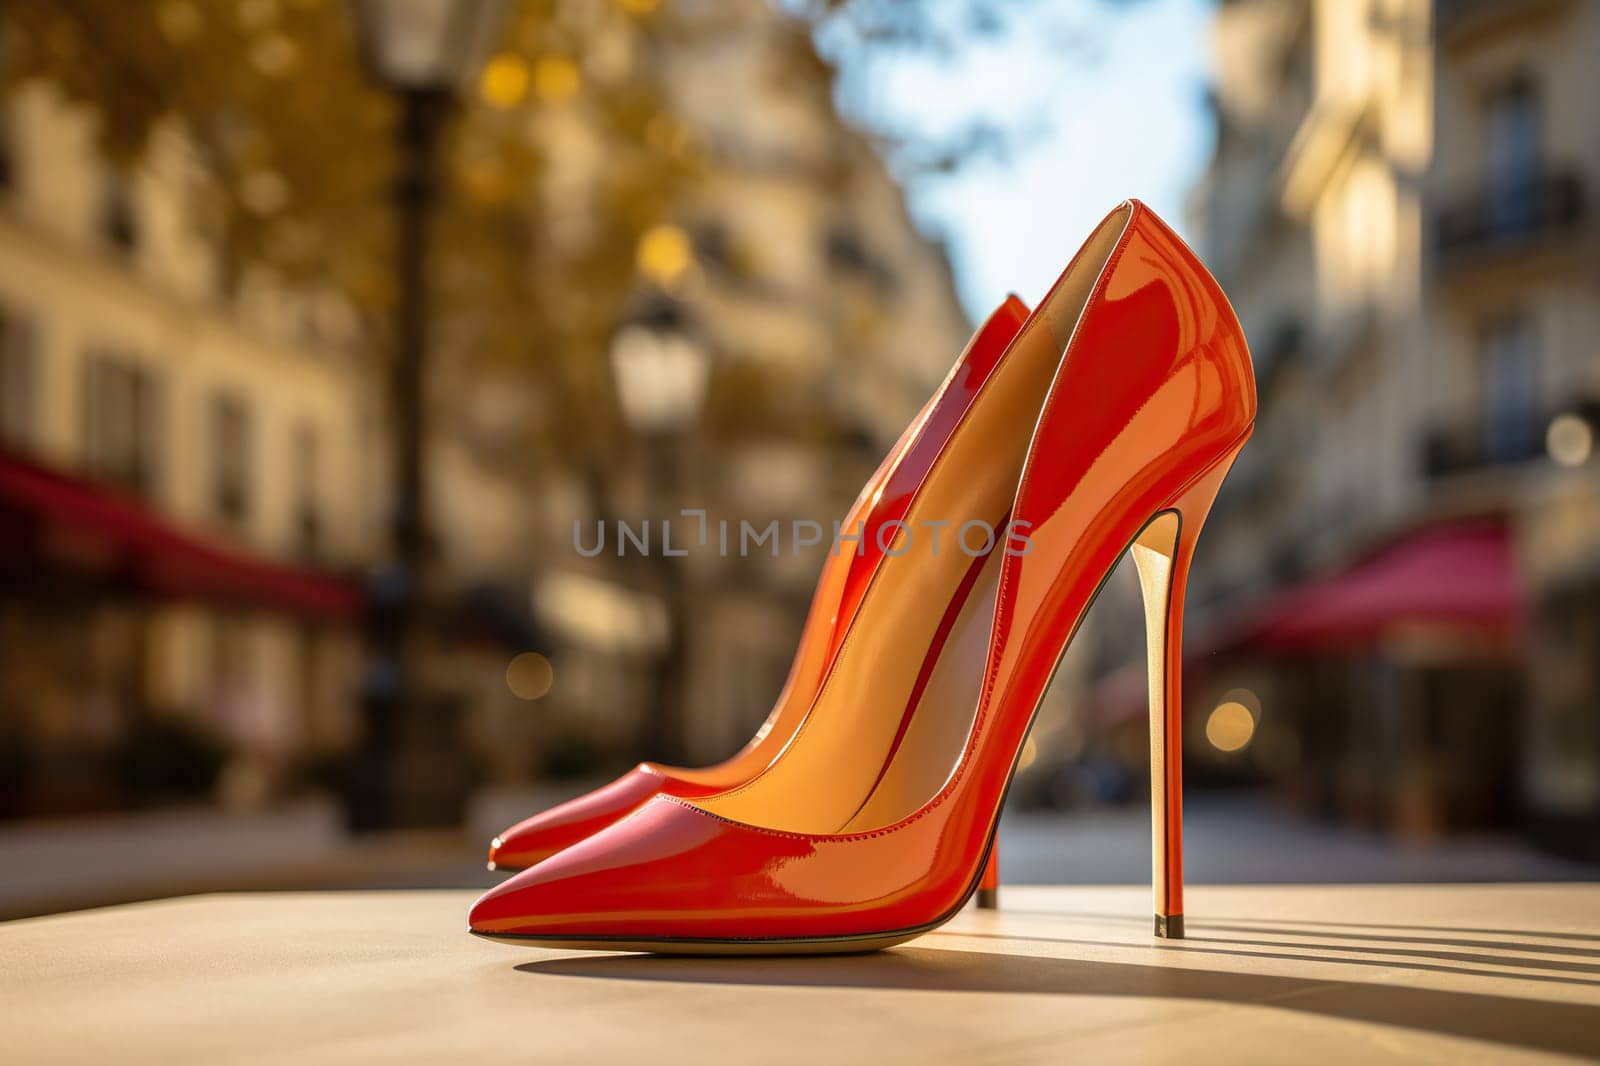 Elegant red women's high-heeled shoe against a city bokeh background.